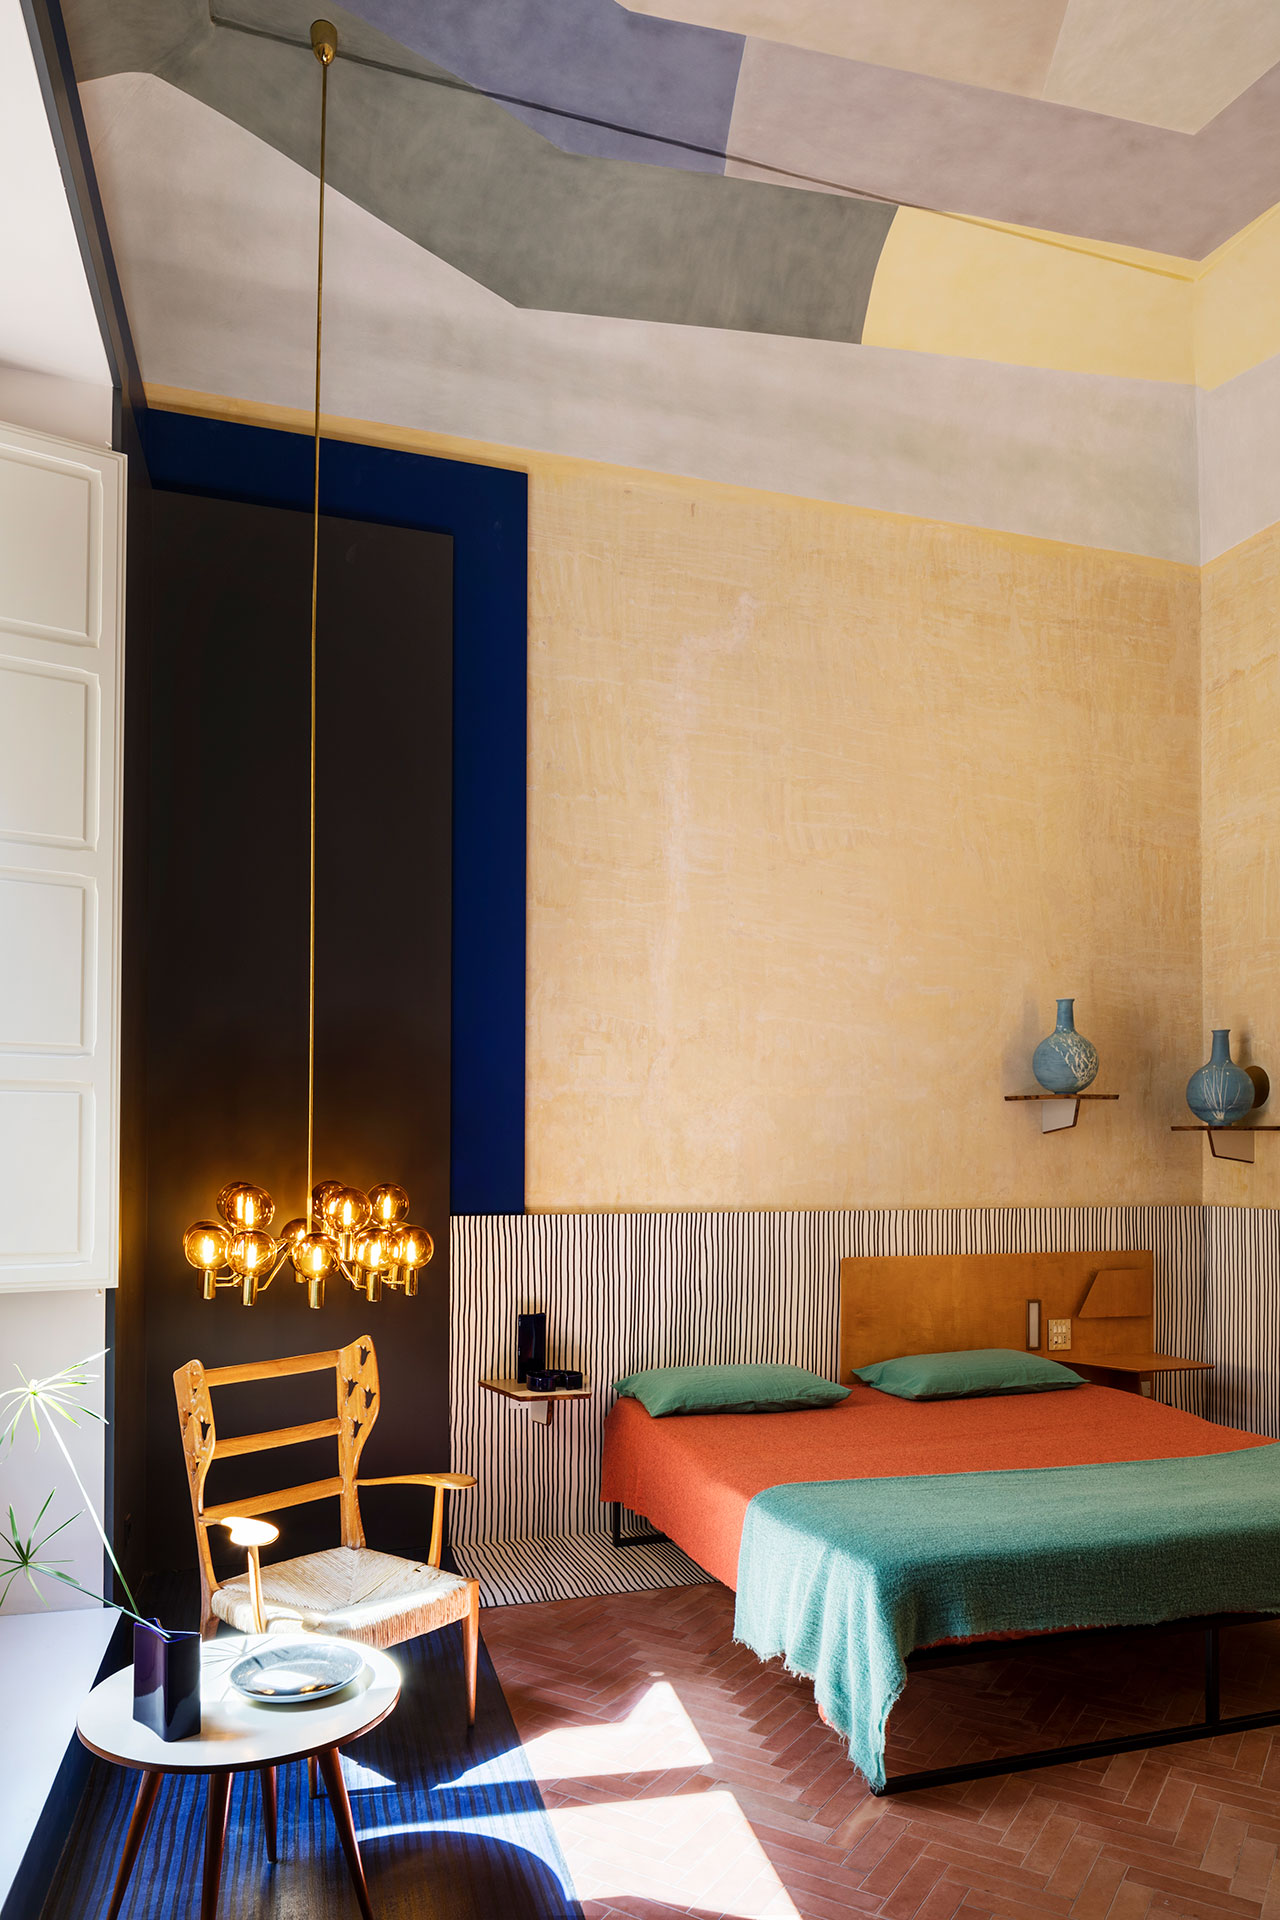 MARIA D'ENGHIEN Suite. Photography by Helenio Barbetta.